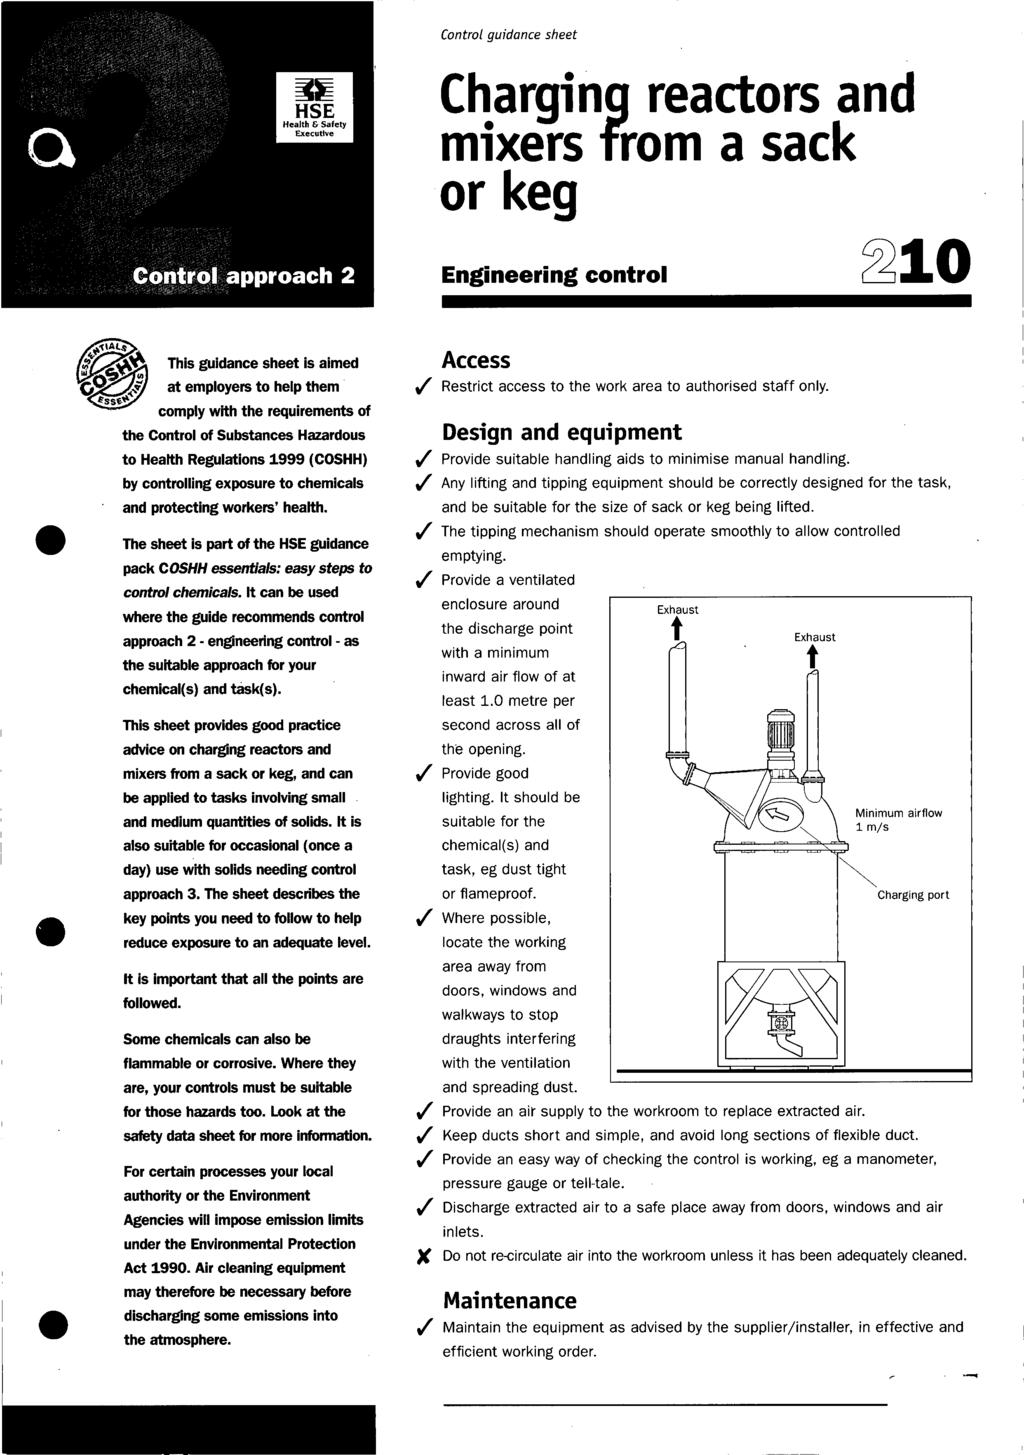 Control guidance sheet Charging reactors and a w mixers trom a saclc or keg Engineering control 210 ' This guidance sheet is aimed at employers to help them comply with the requirements of the